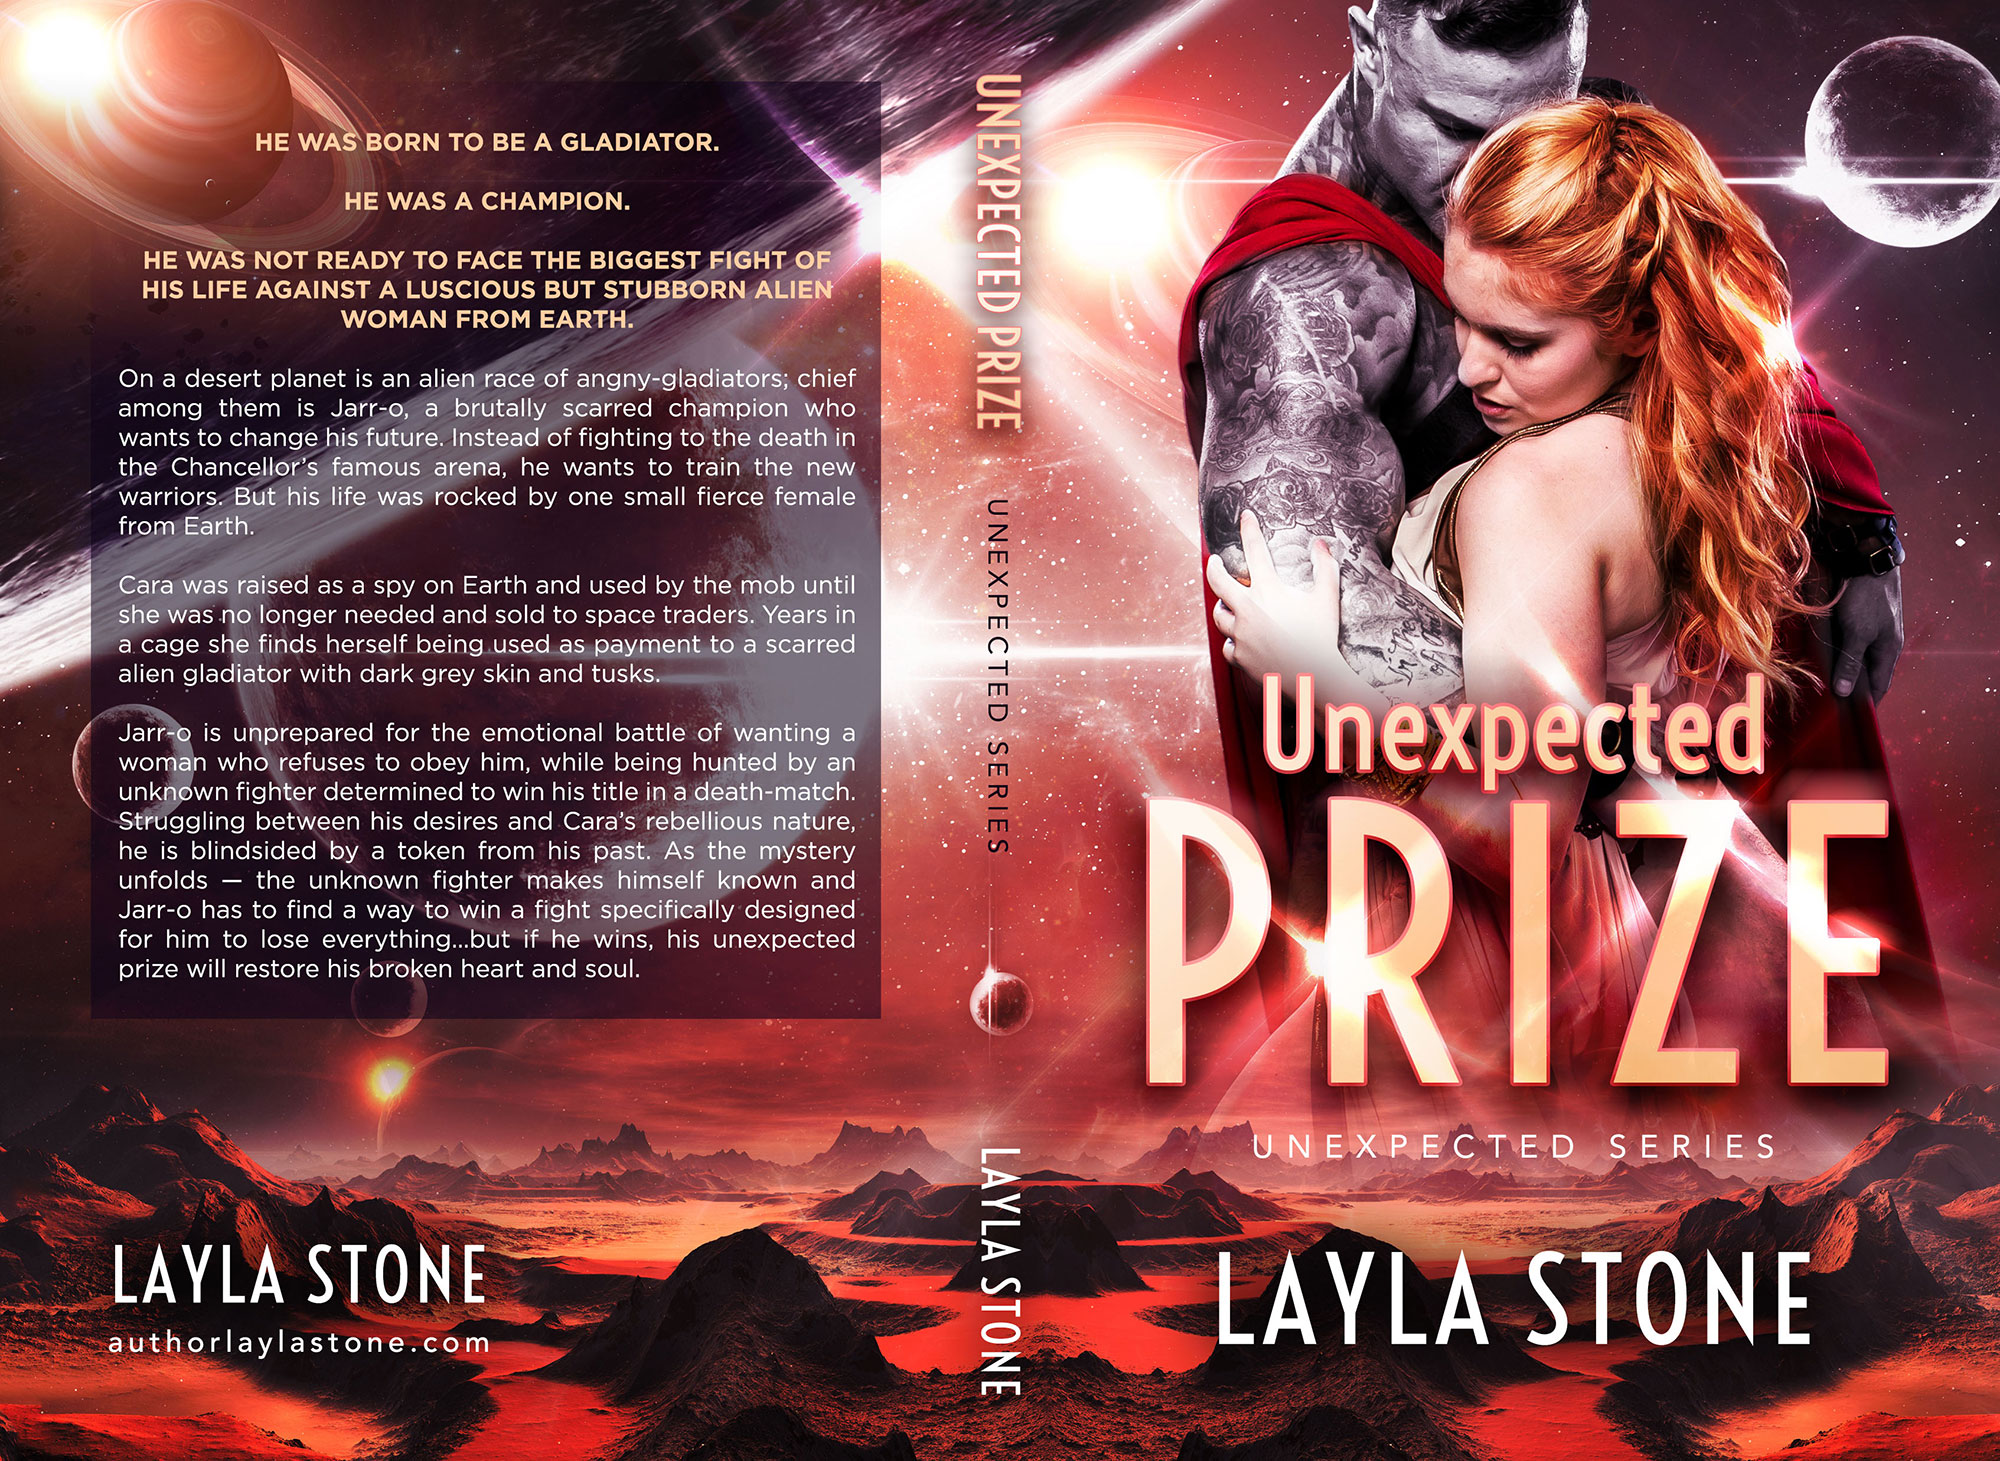 Unexpected Prize by Layla Stone (Print Coverflat)